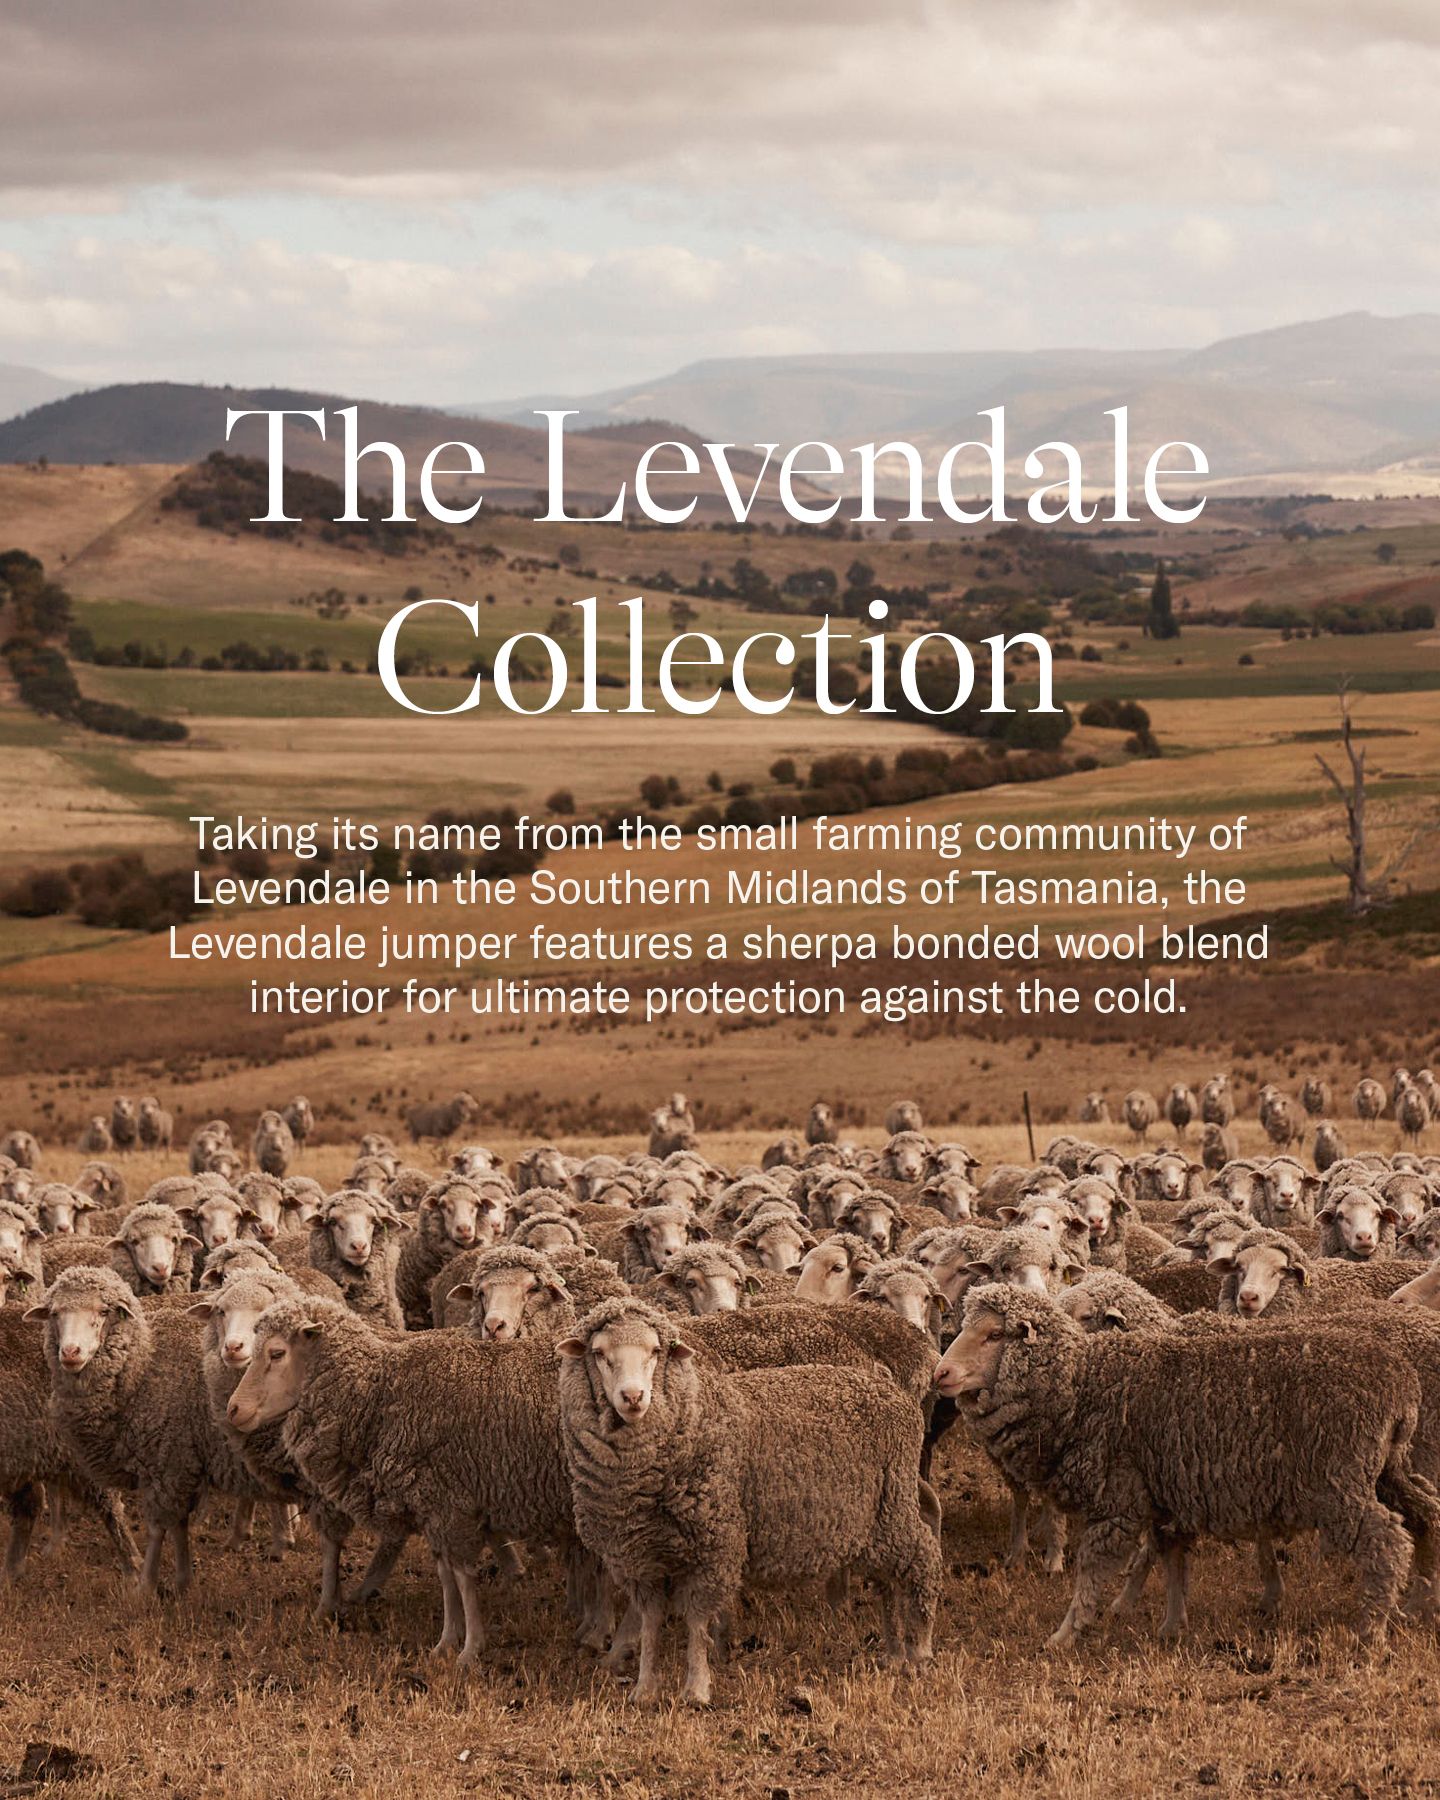 New Arrivals | The Levendale Collection

Our bestselling Levendale collection wil...

In addition to the original half zip jumper, by popular demand the Levendale is now also available in a full zip jumper and a vest.

Shop via the link in bio.

#RBSellars